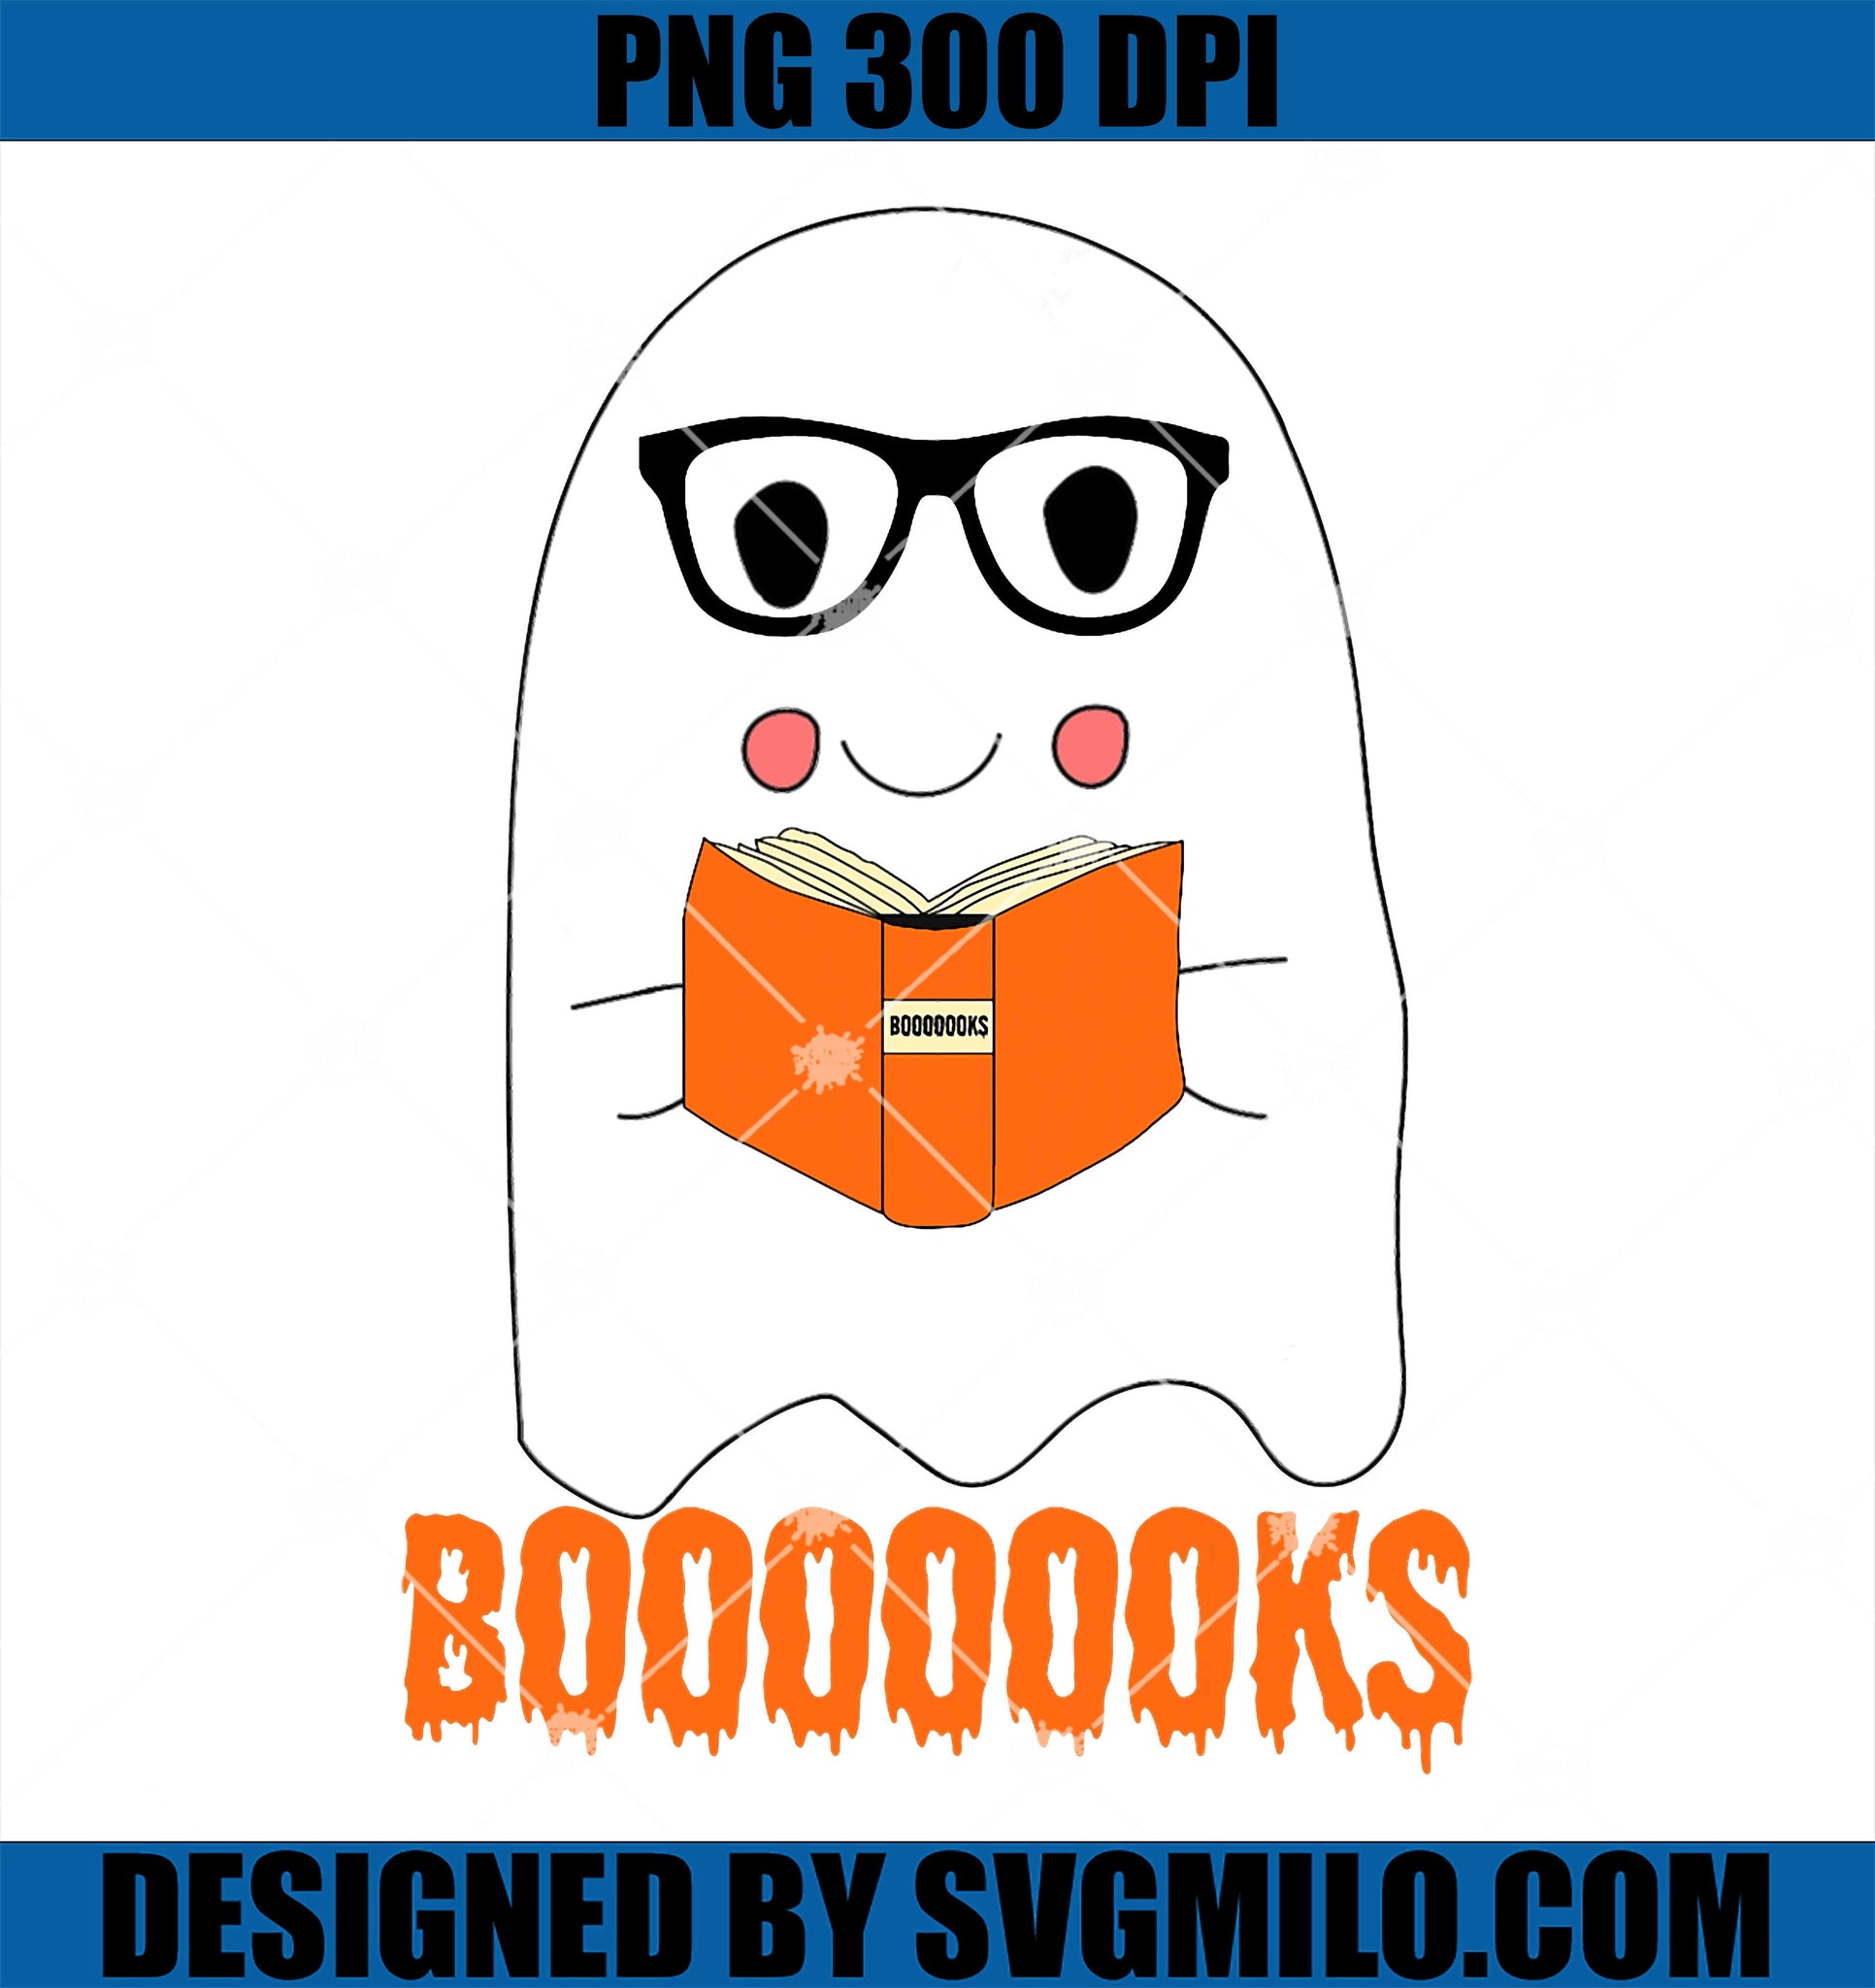 Boooooks Halloween PNG, Boo Read Books Ghost Reading Books PNG